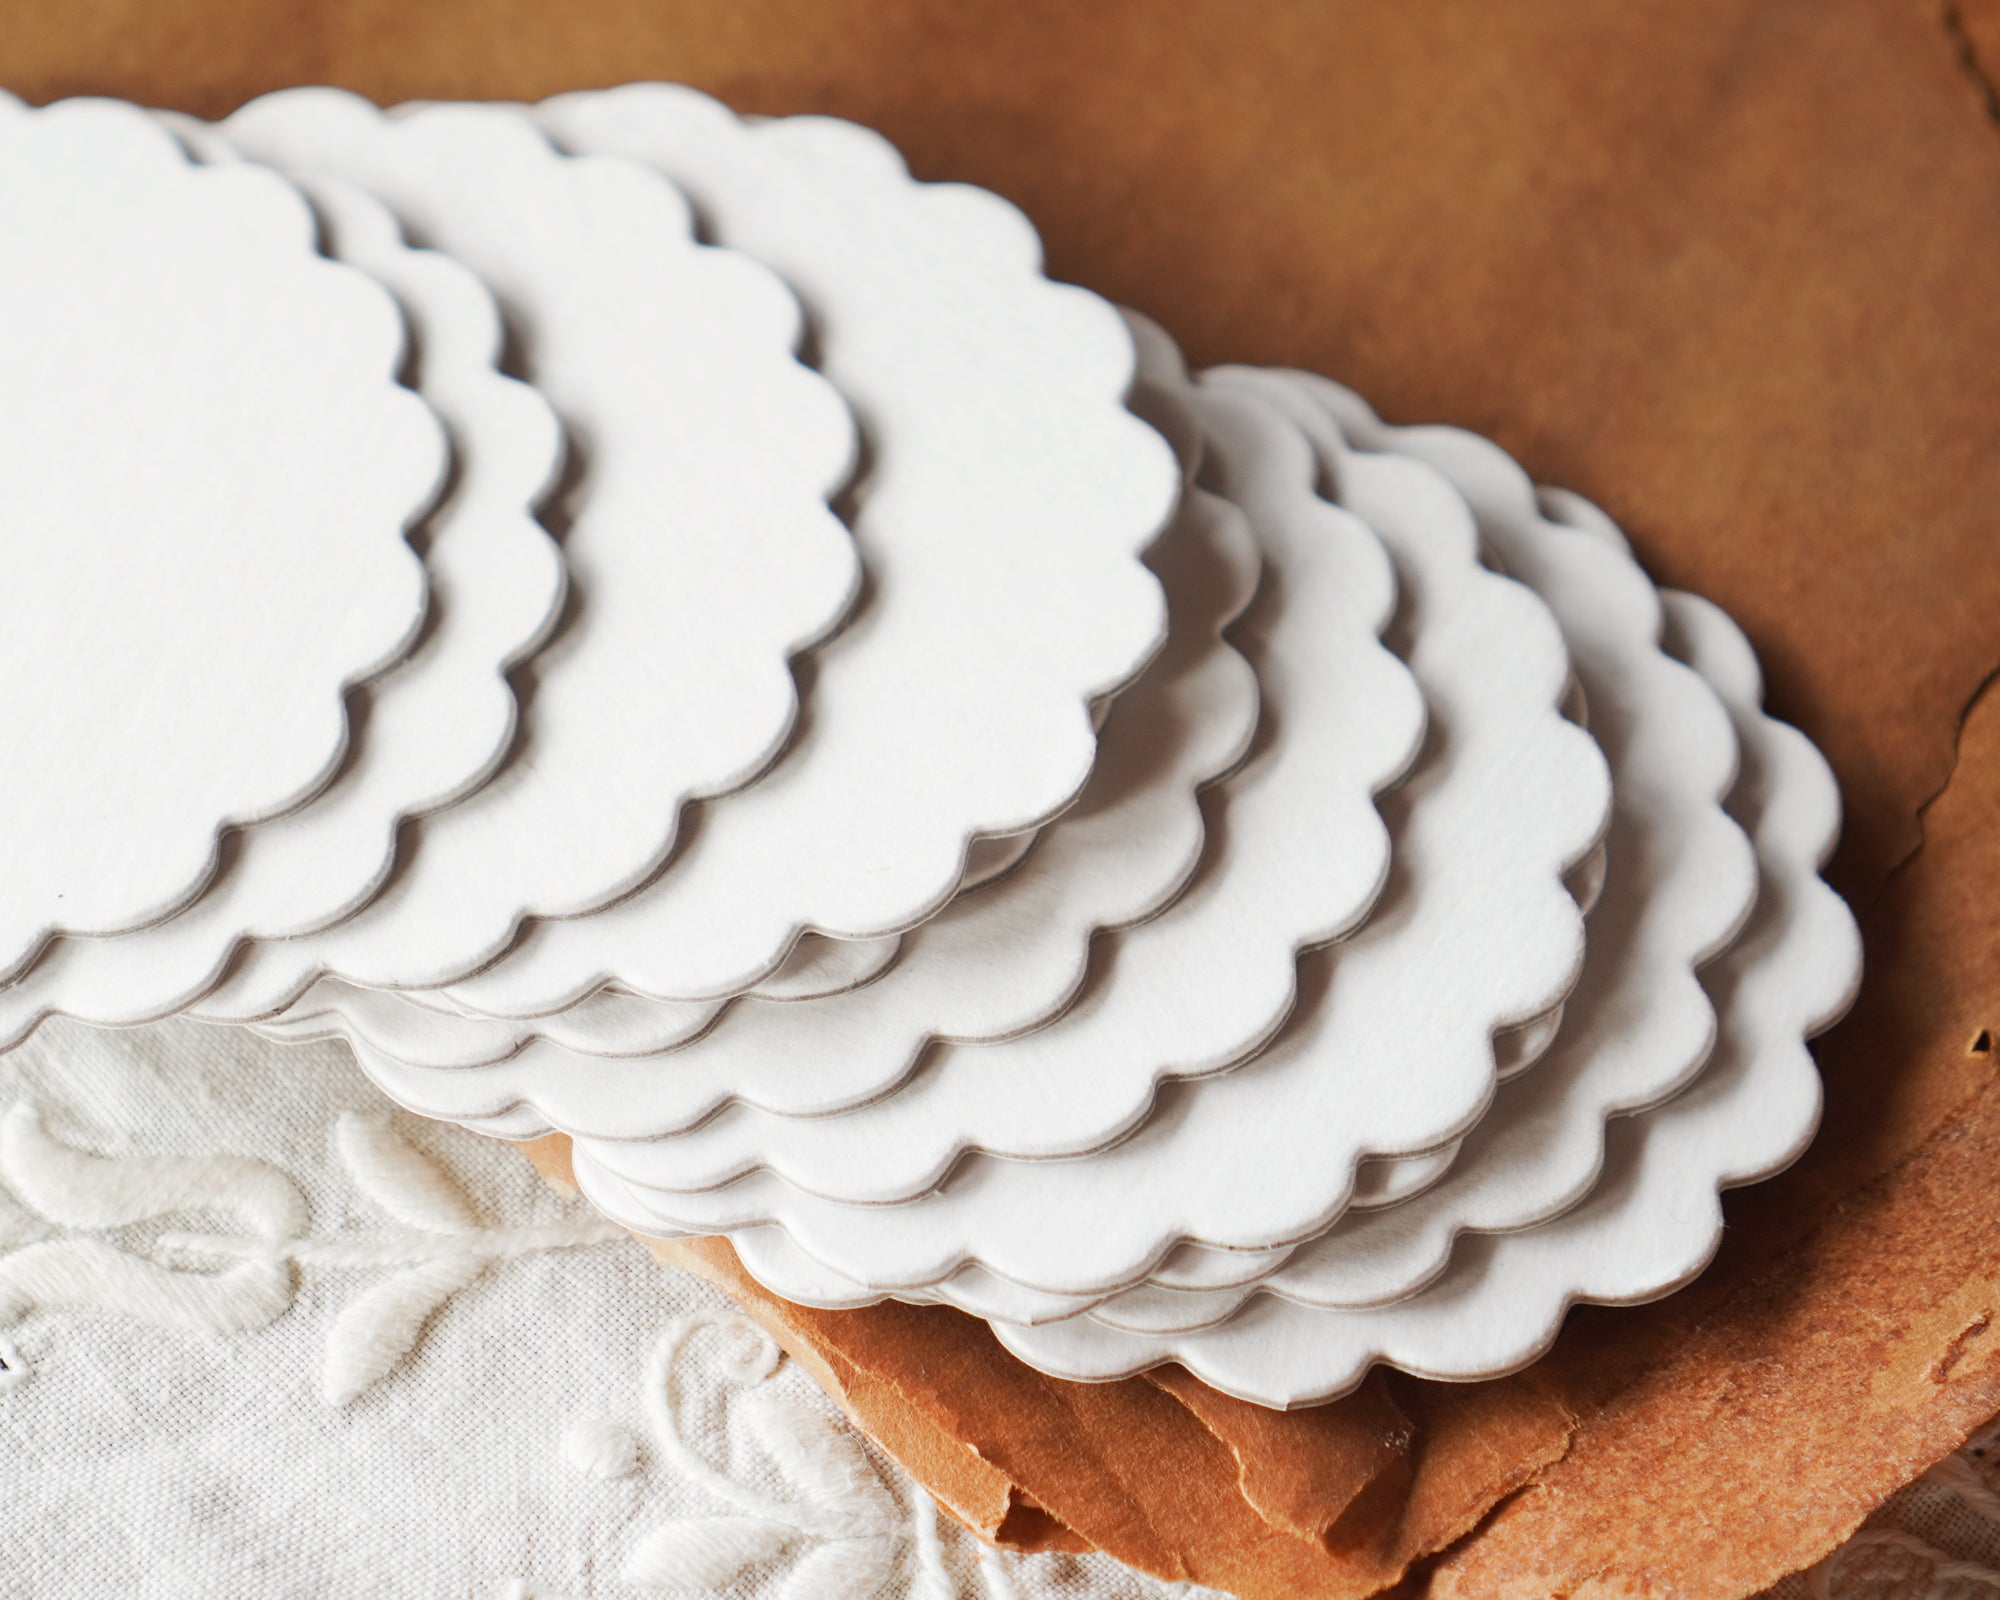 3-Inch Chipboard Craft Circles - Die Cut Scalloped Edge White Cardboard Rounds, 12 Pcs.